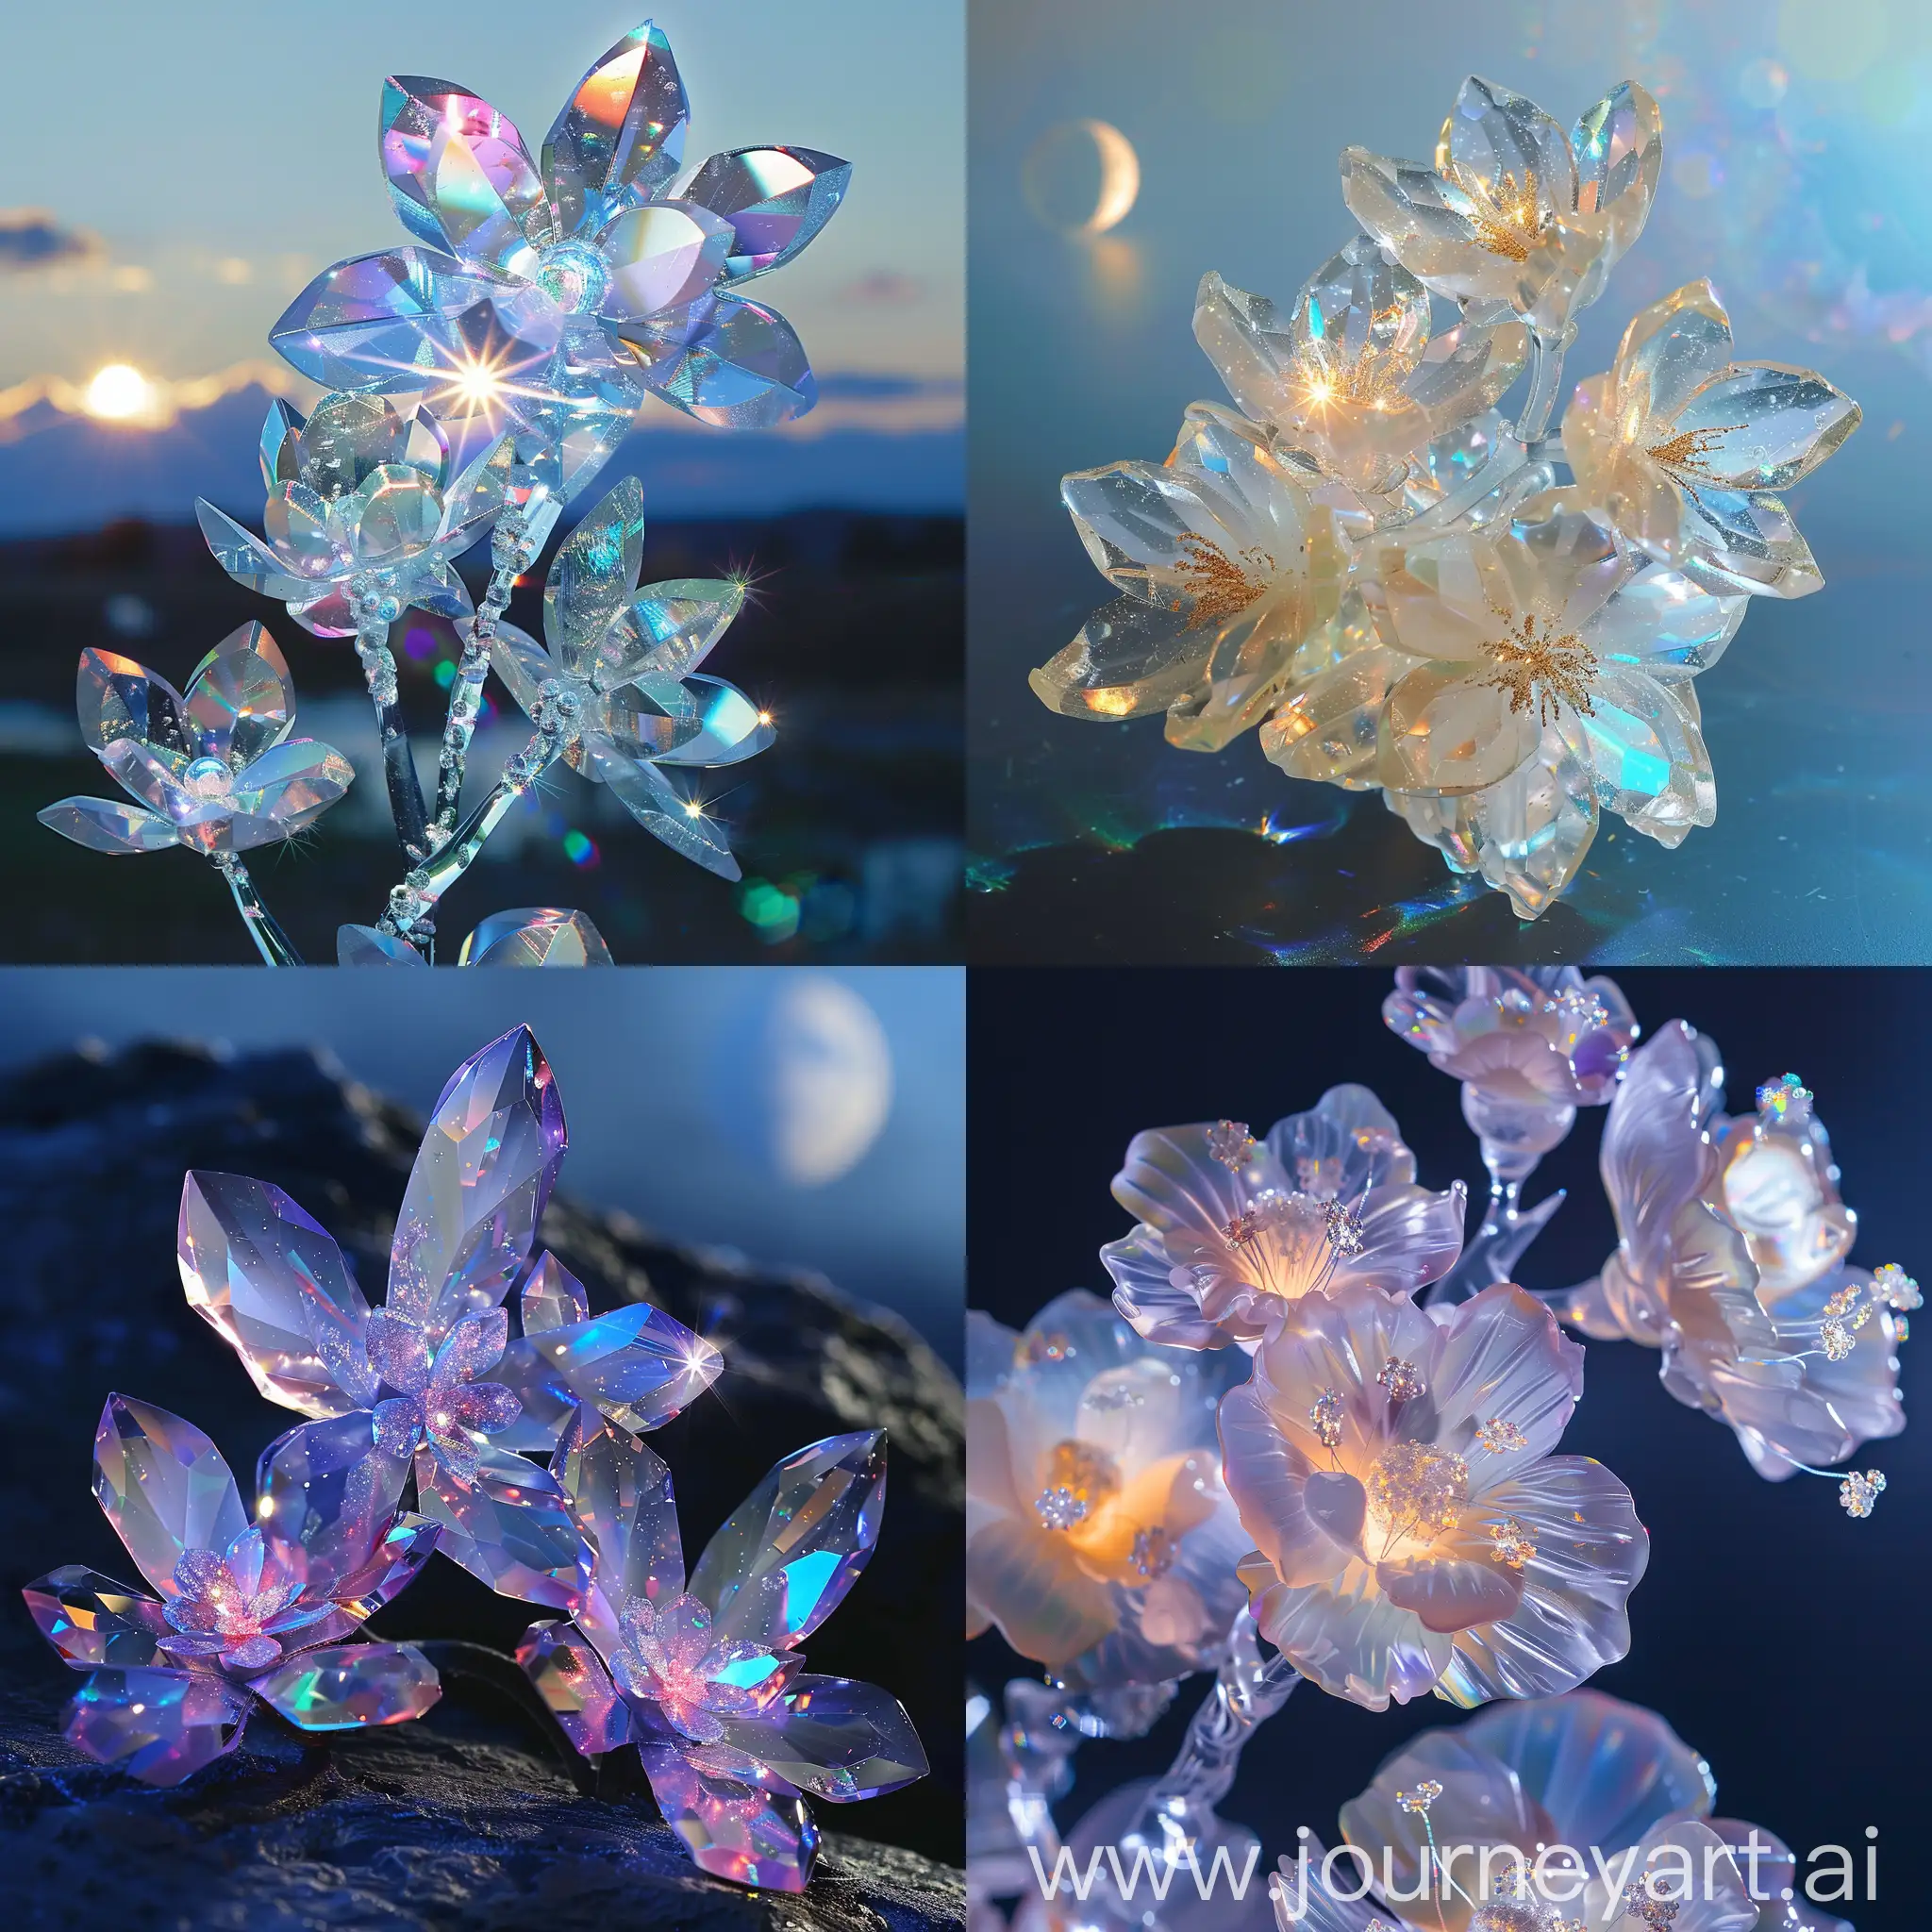 Opalescent-Crystal-Flowers-Under-Moonlight-Shine